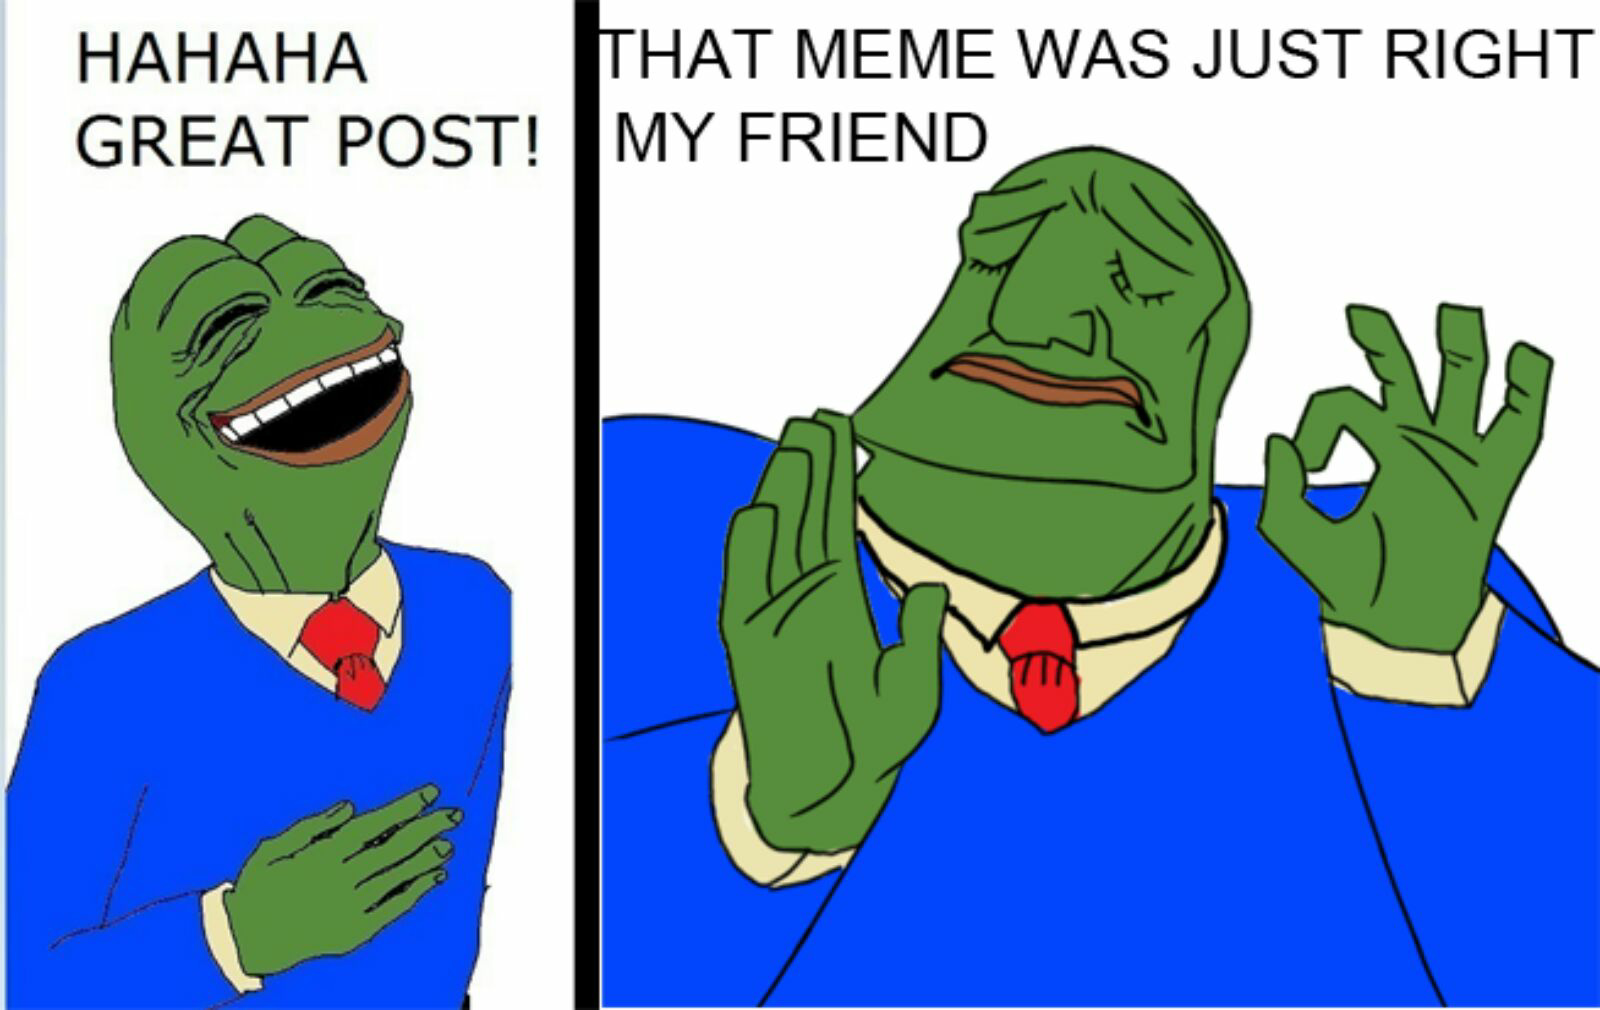 When the meme is just right.